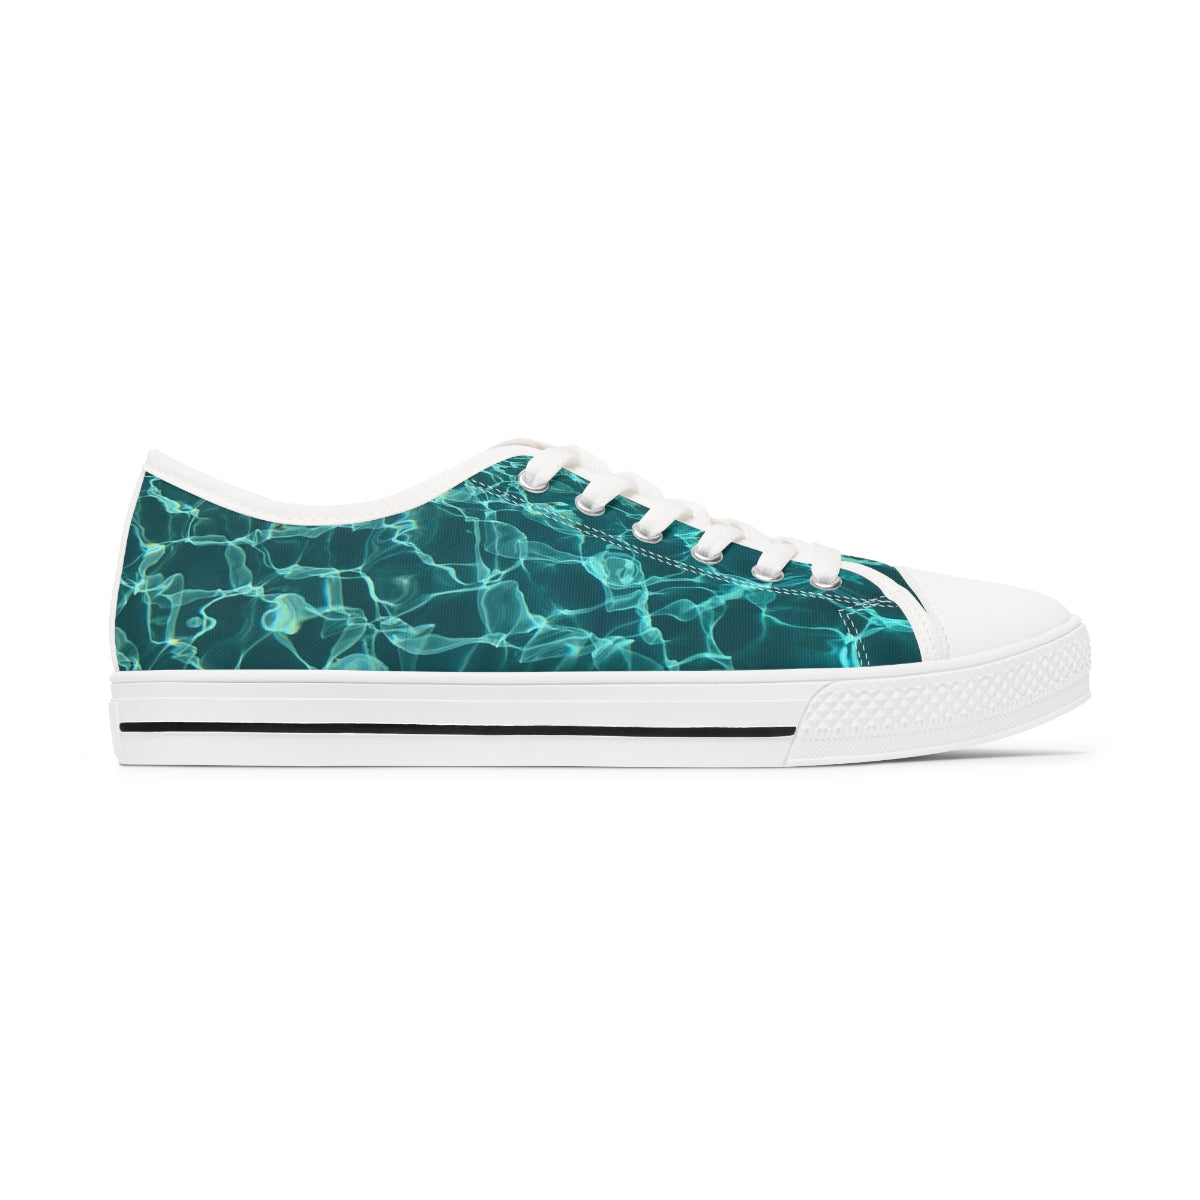 Women's Low Top Sneakers Turquoise color design